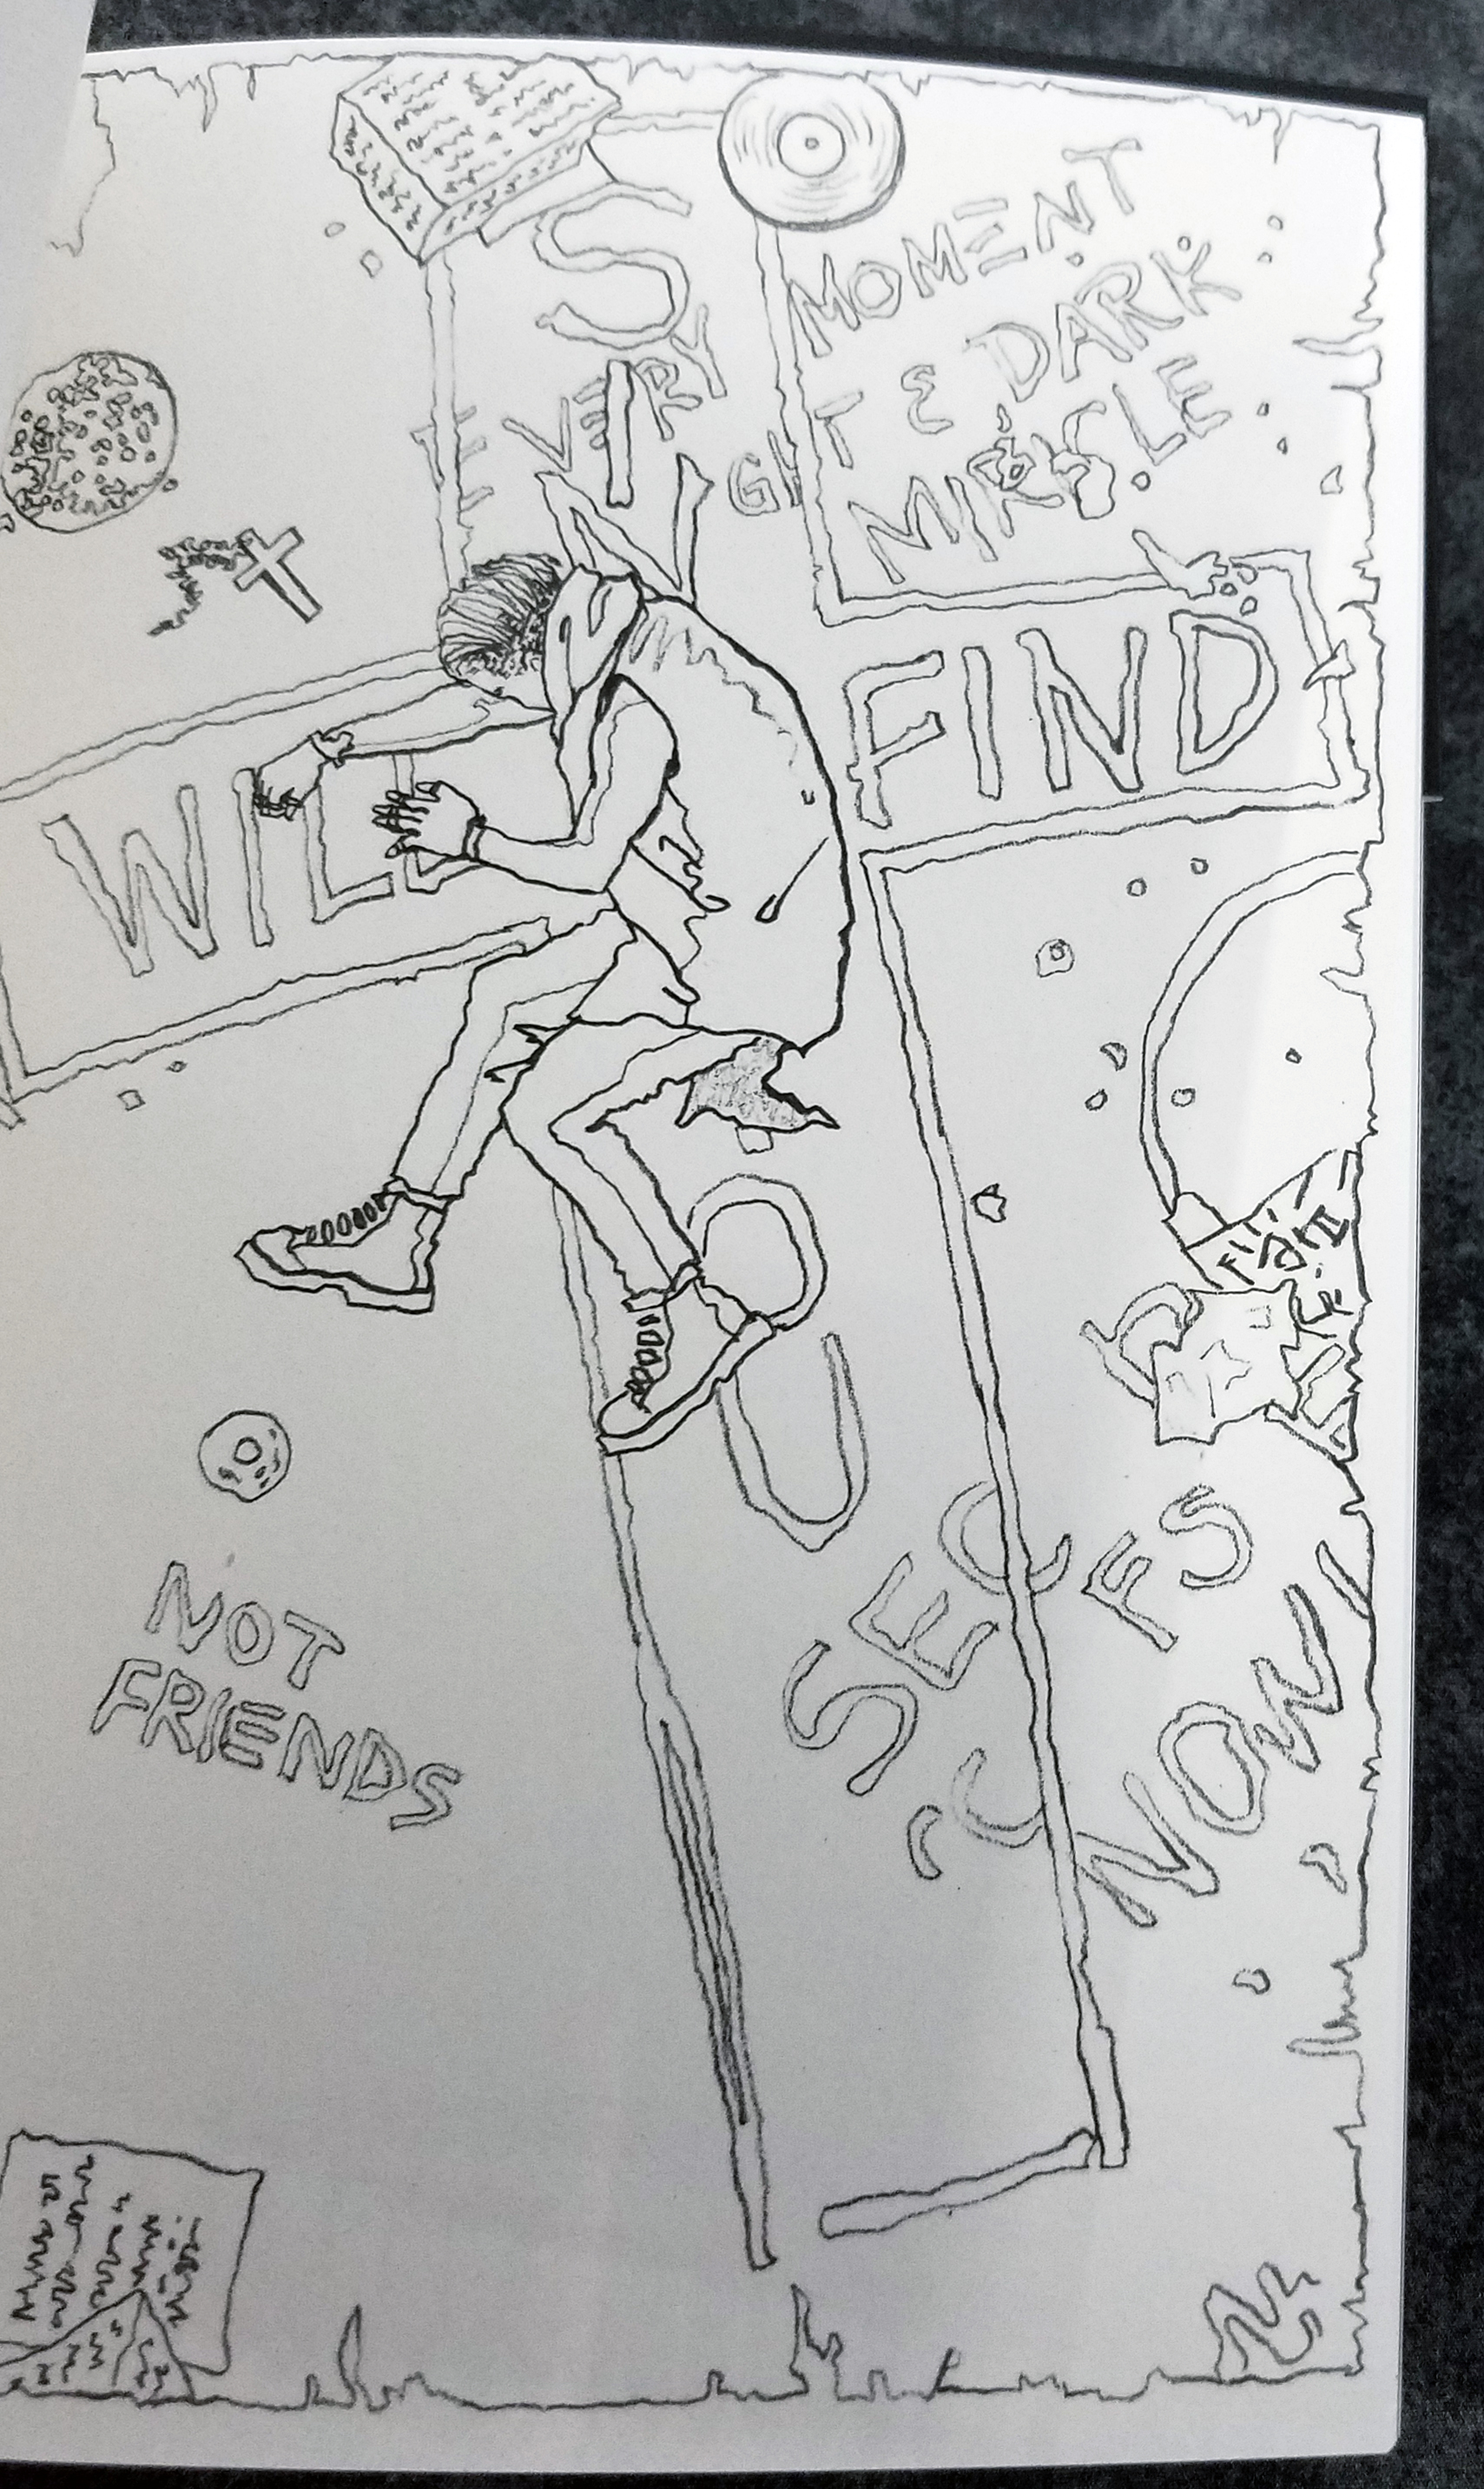 Juice WRLD Official Coloring Book